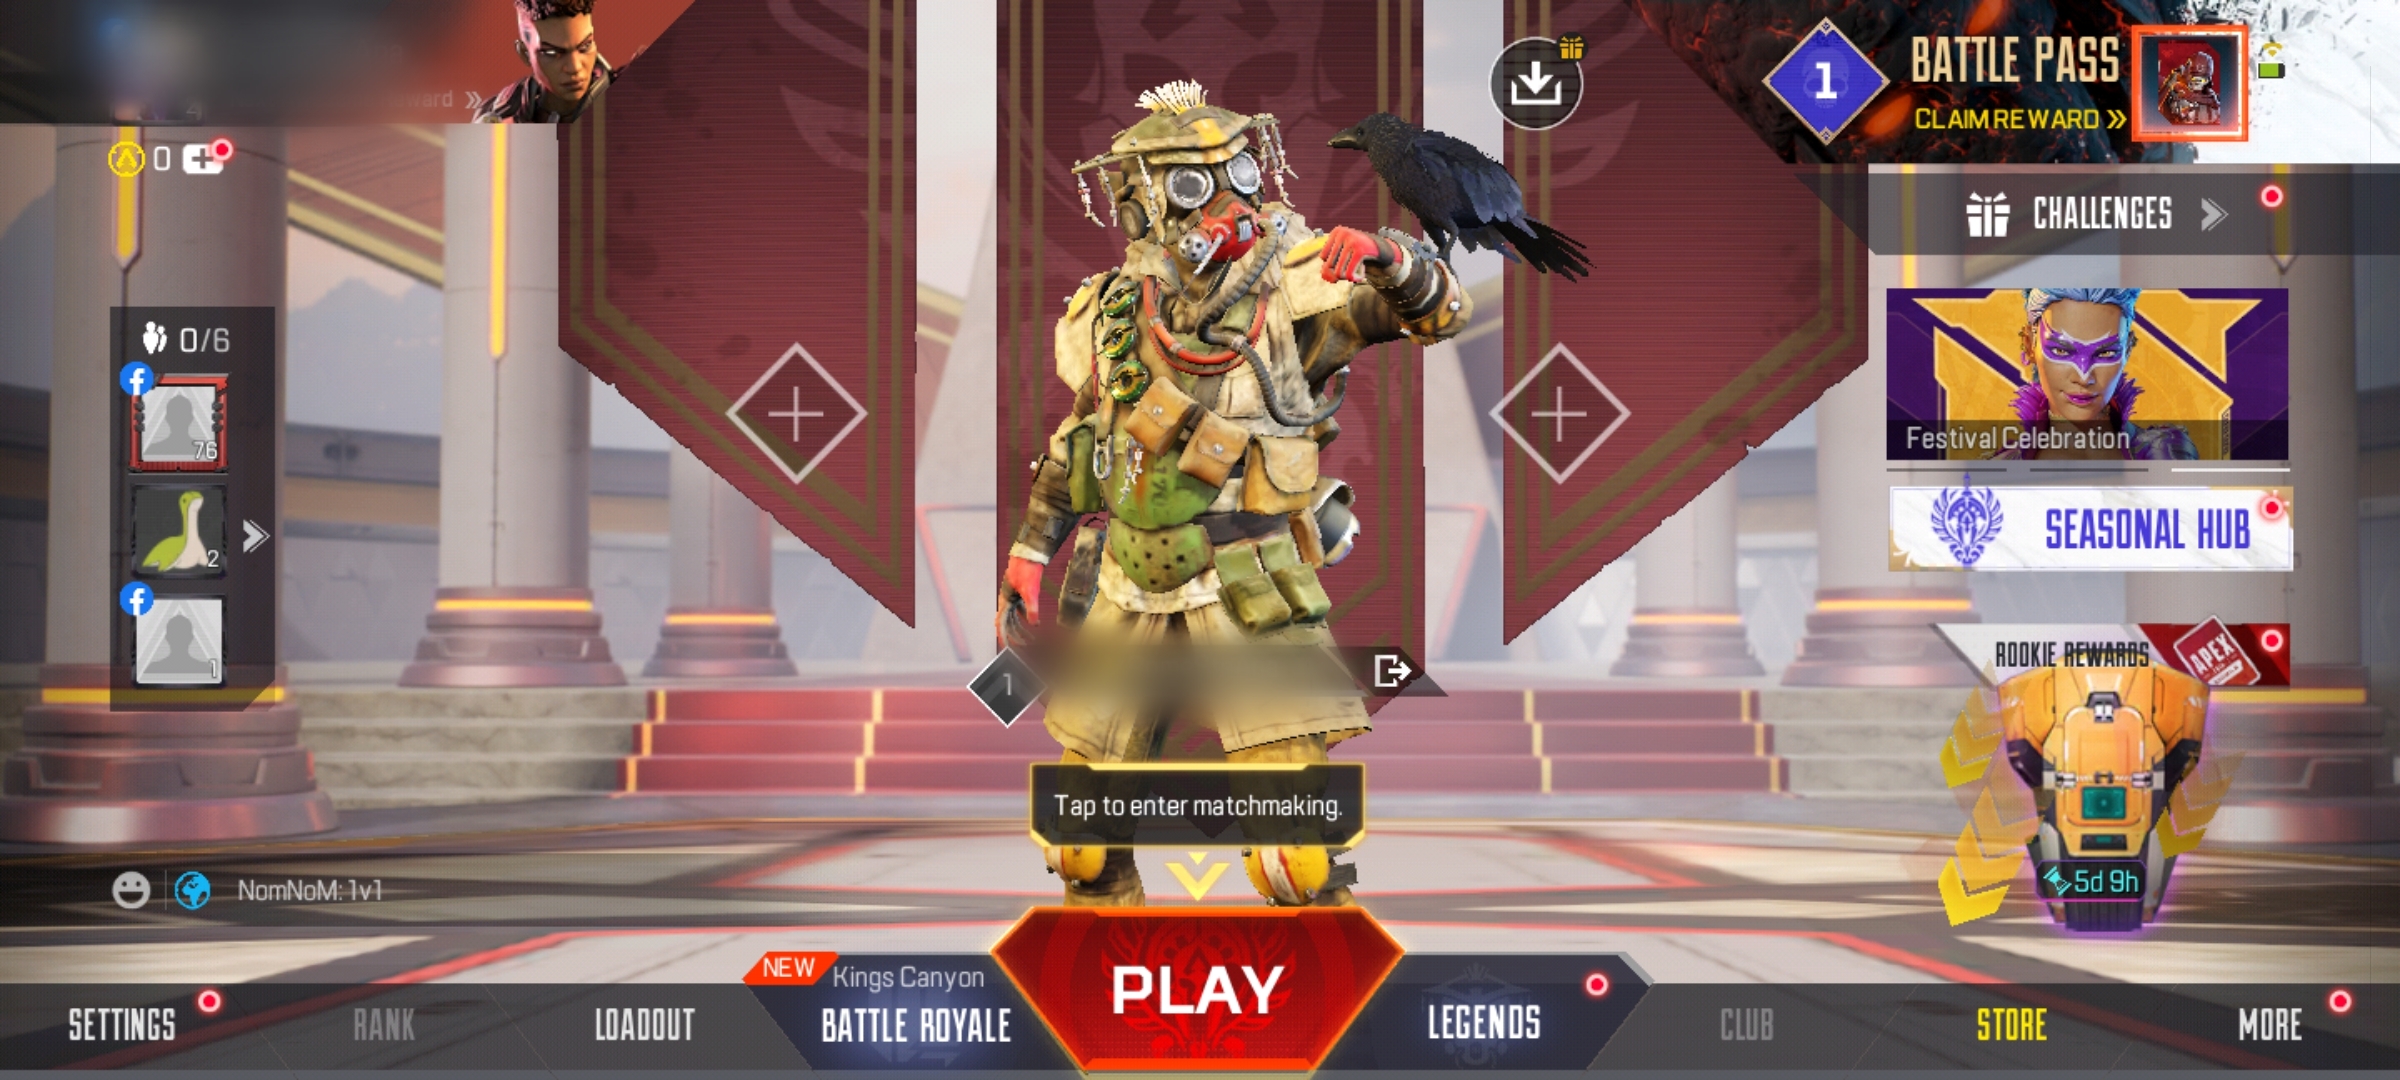 New Player Apex Legends Mobile